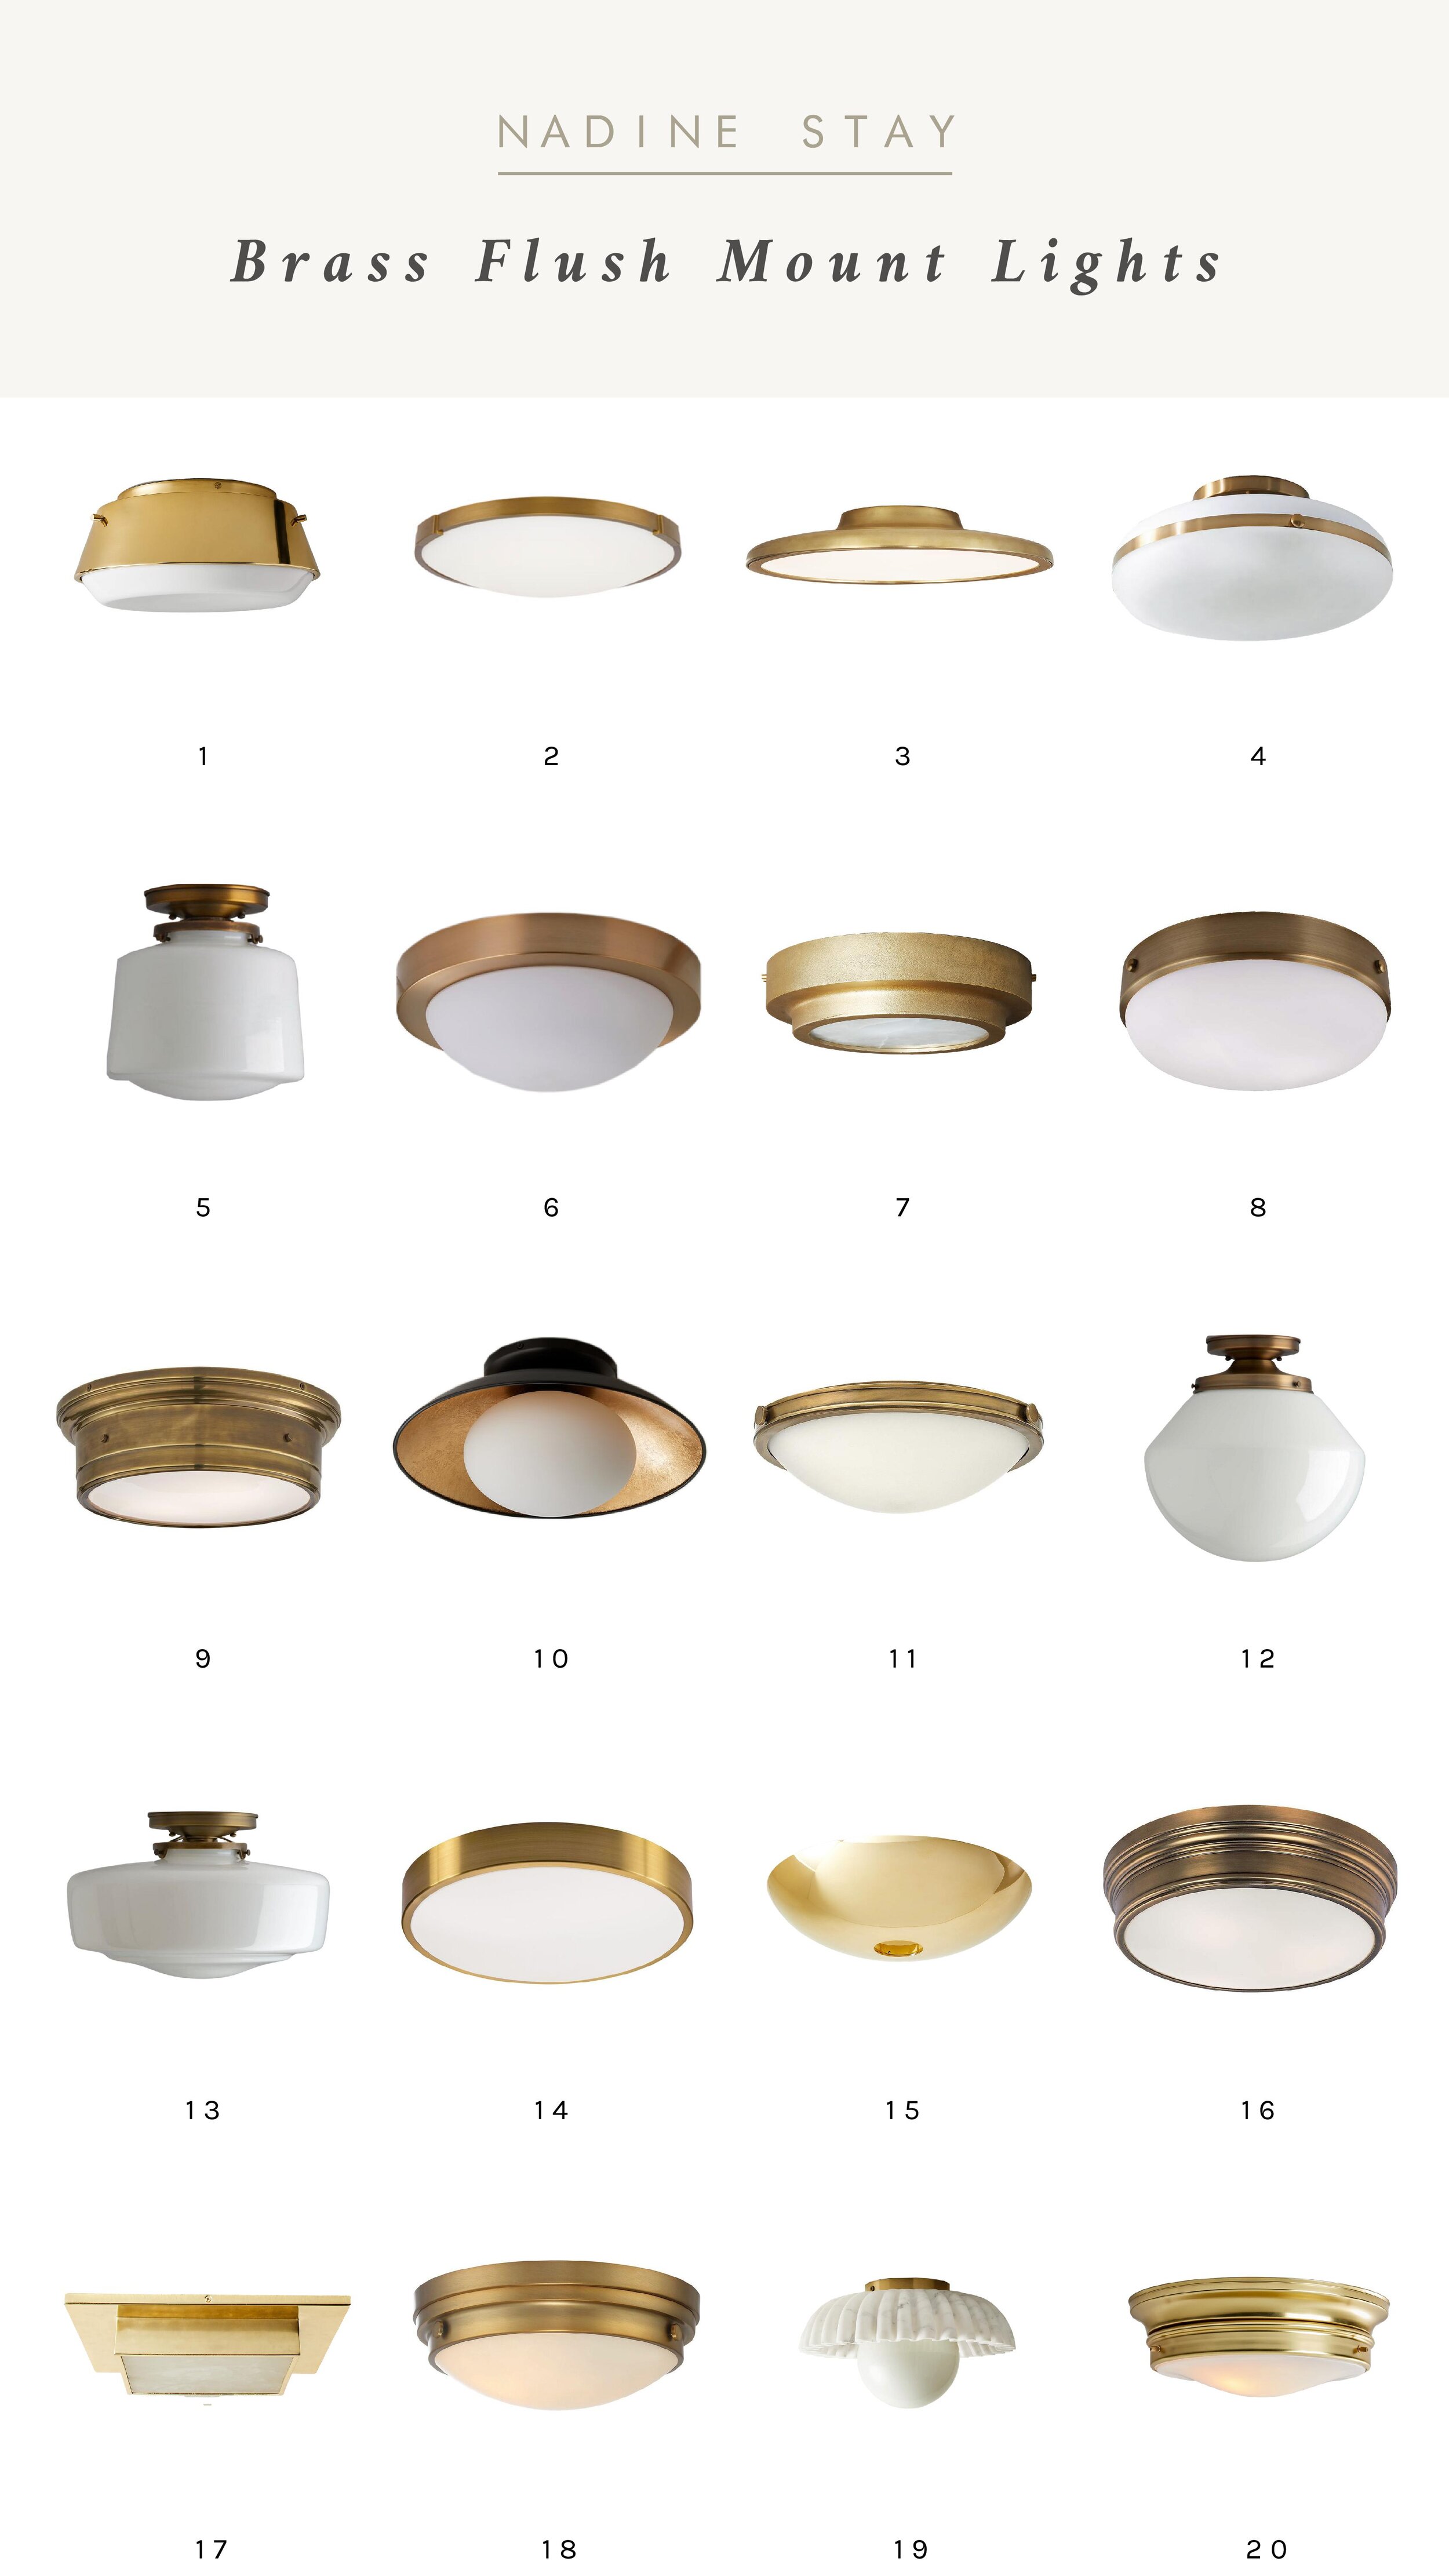 Top 20 brass flush mount lights. Brass and opal glass shade ceiling lights for every budget. High end and budget friendly flush and semi-flush lights. | Nadine Stay